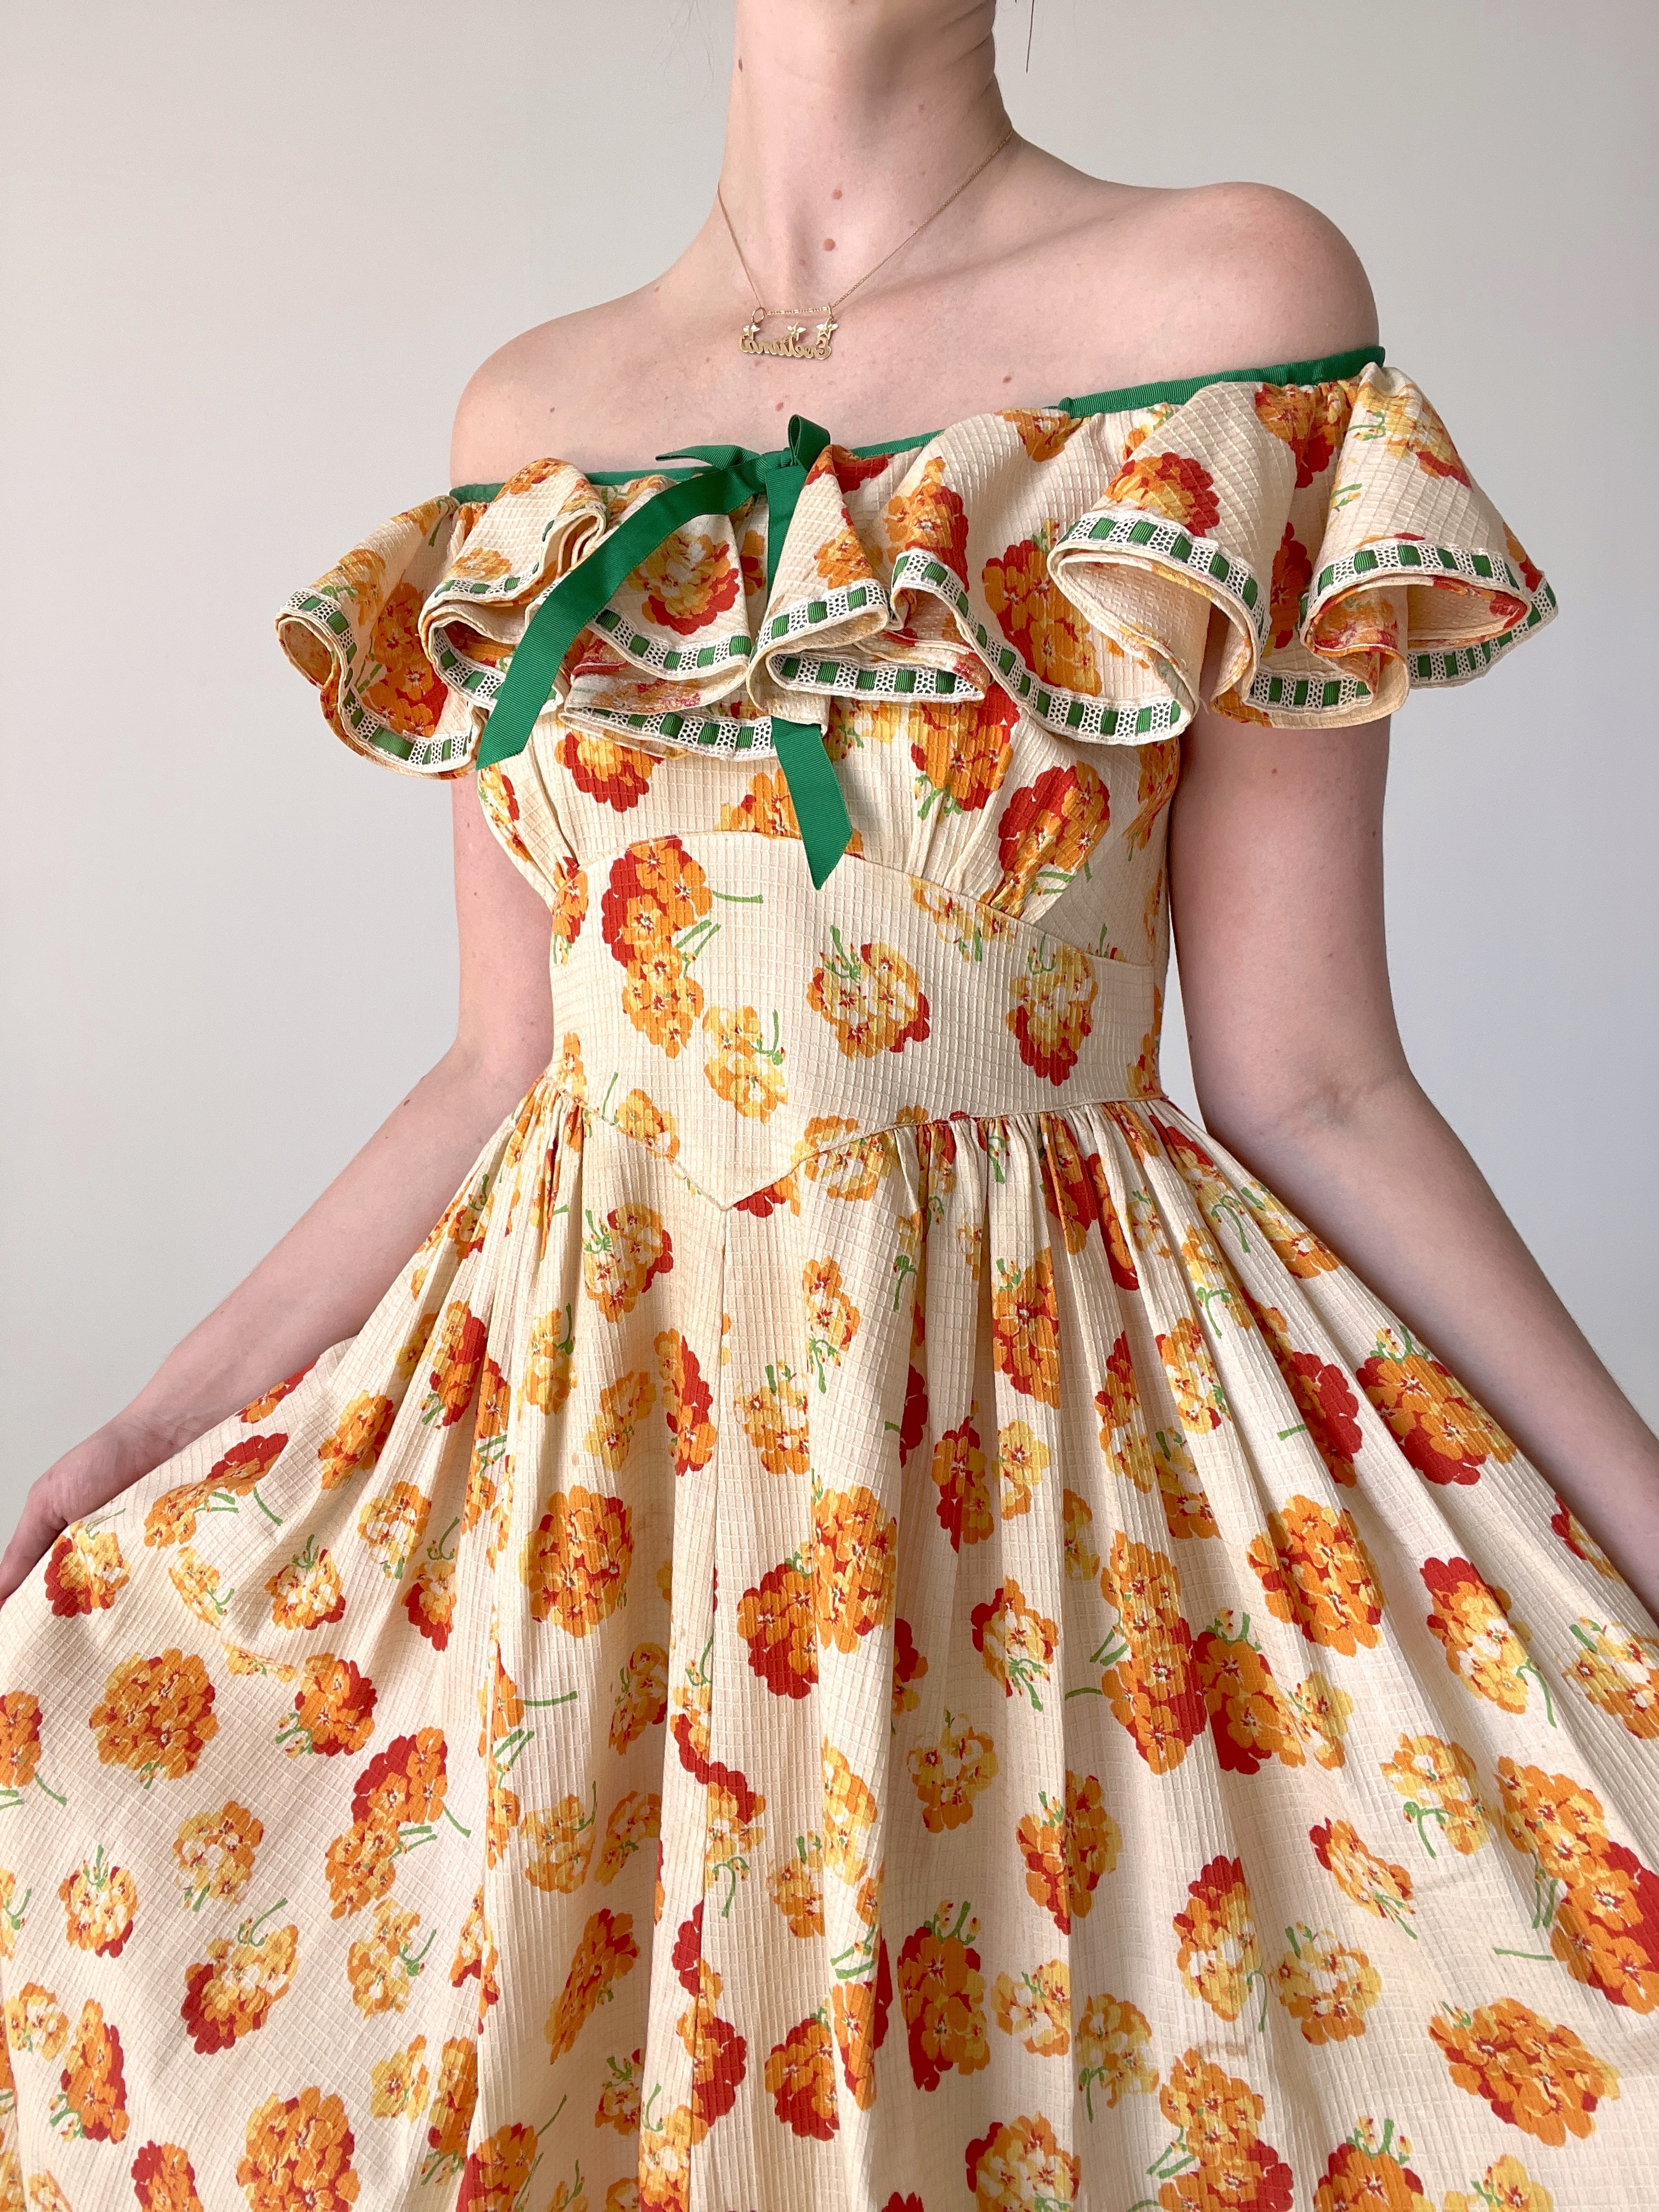 1940's Orange Floral Print Dress With Ruffle